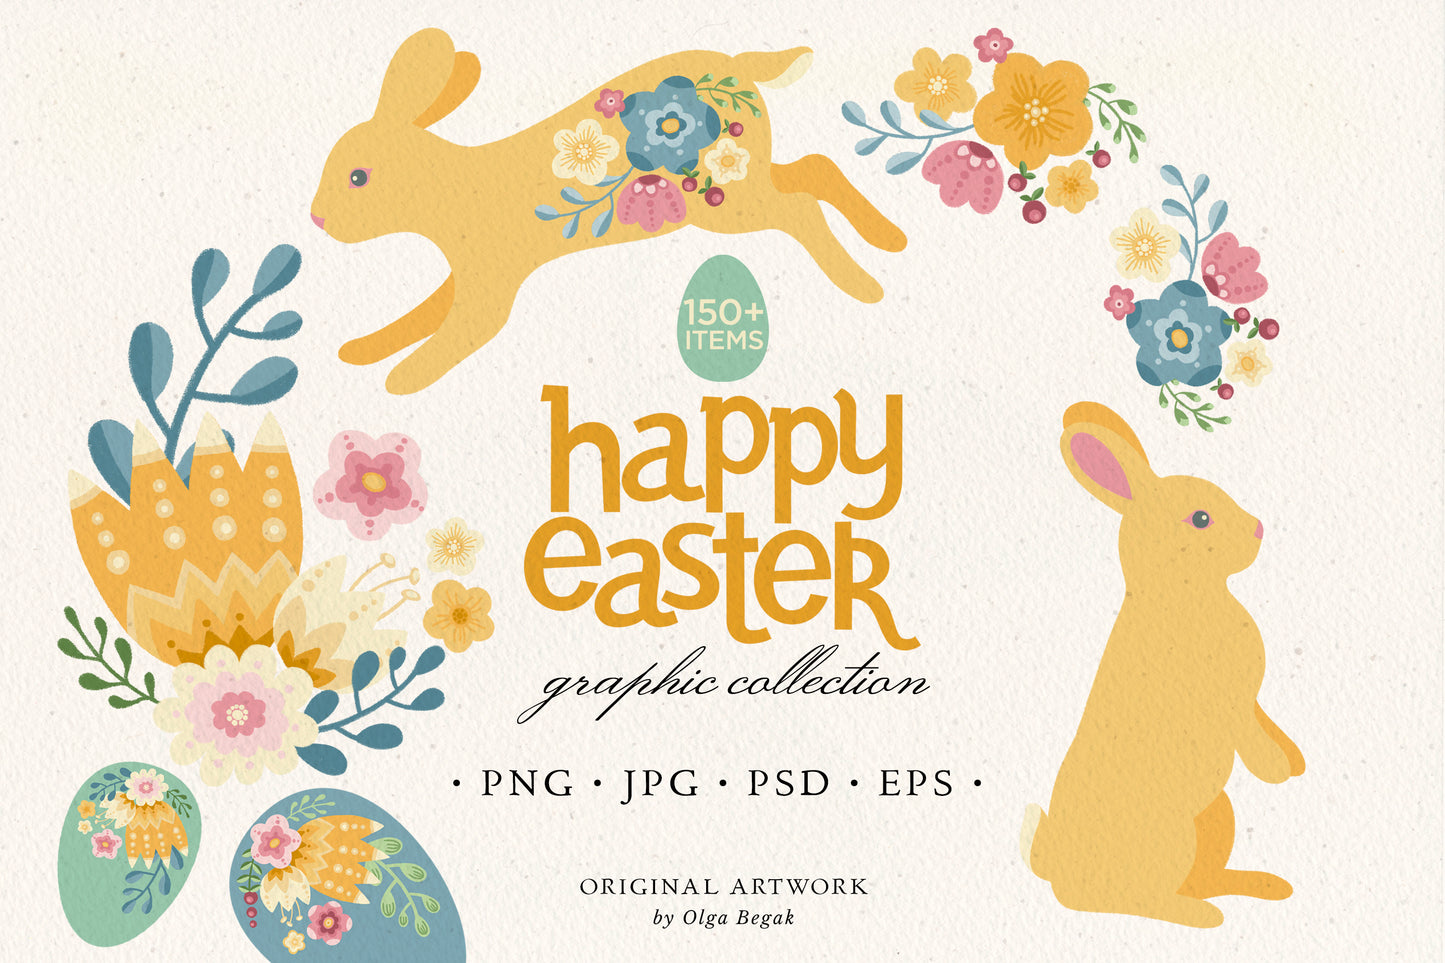 HAPPY EASTER Graphic Collection